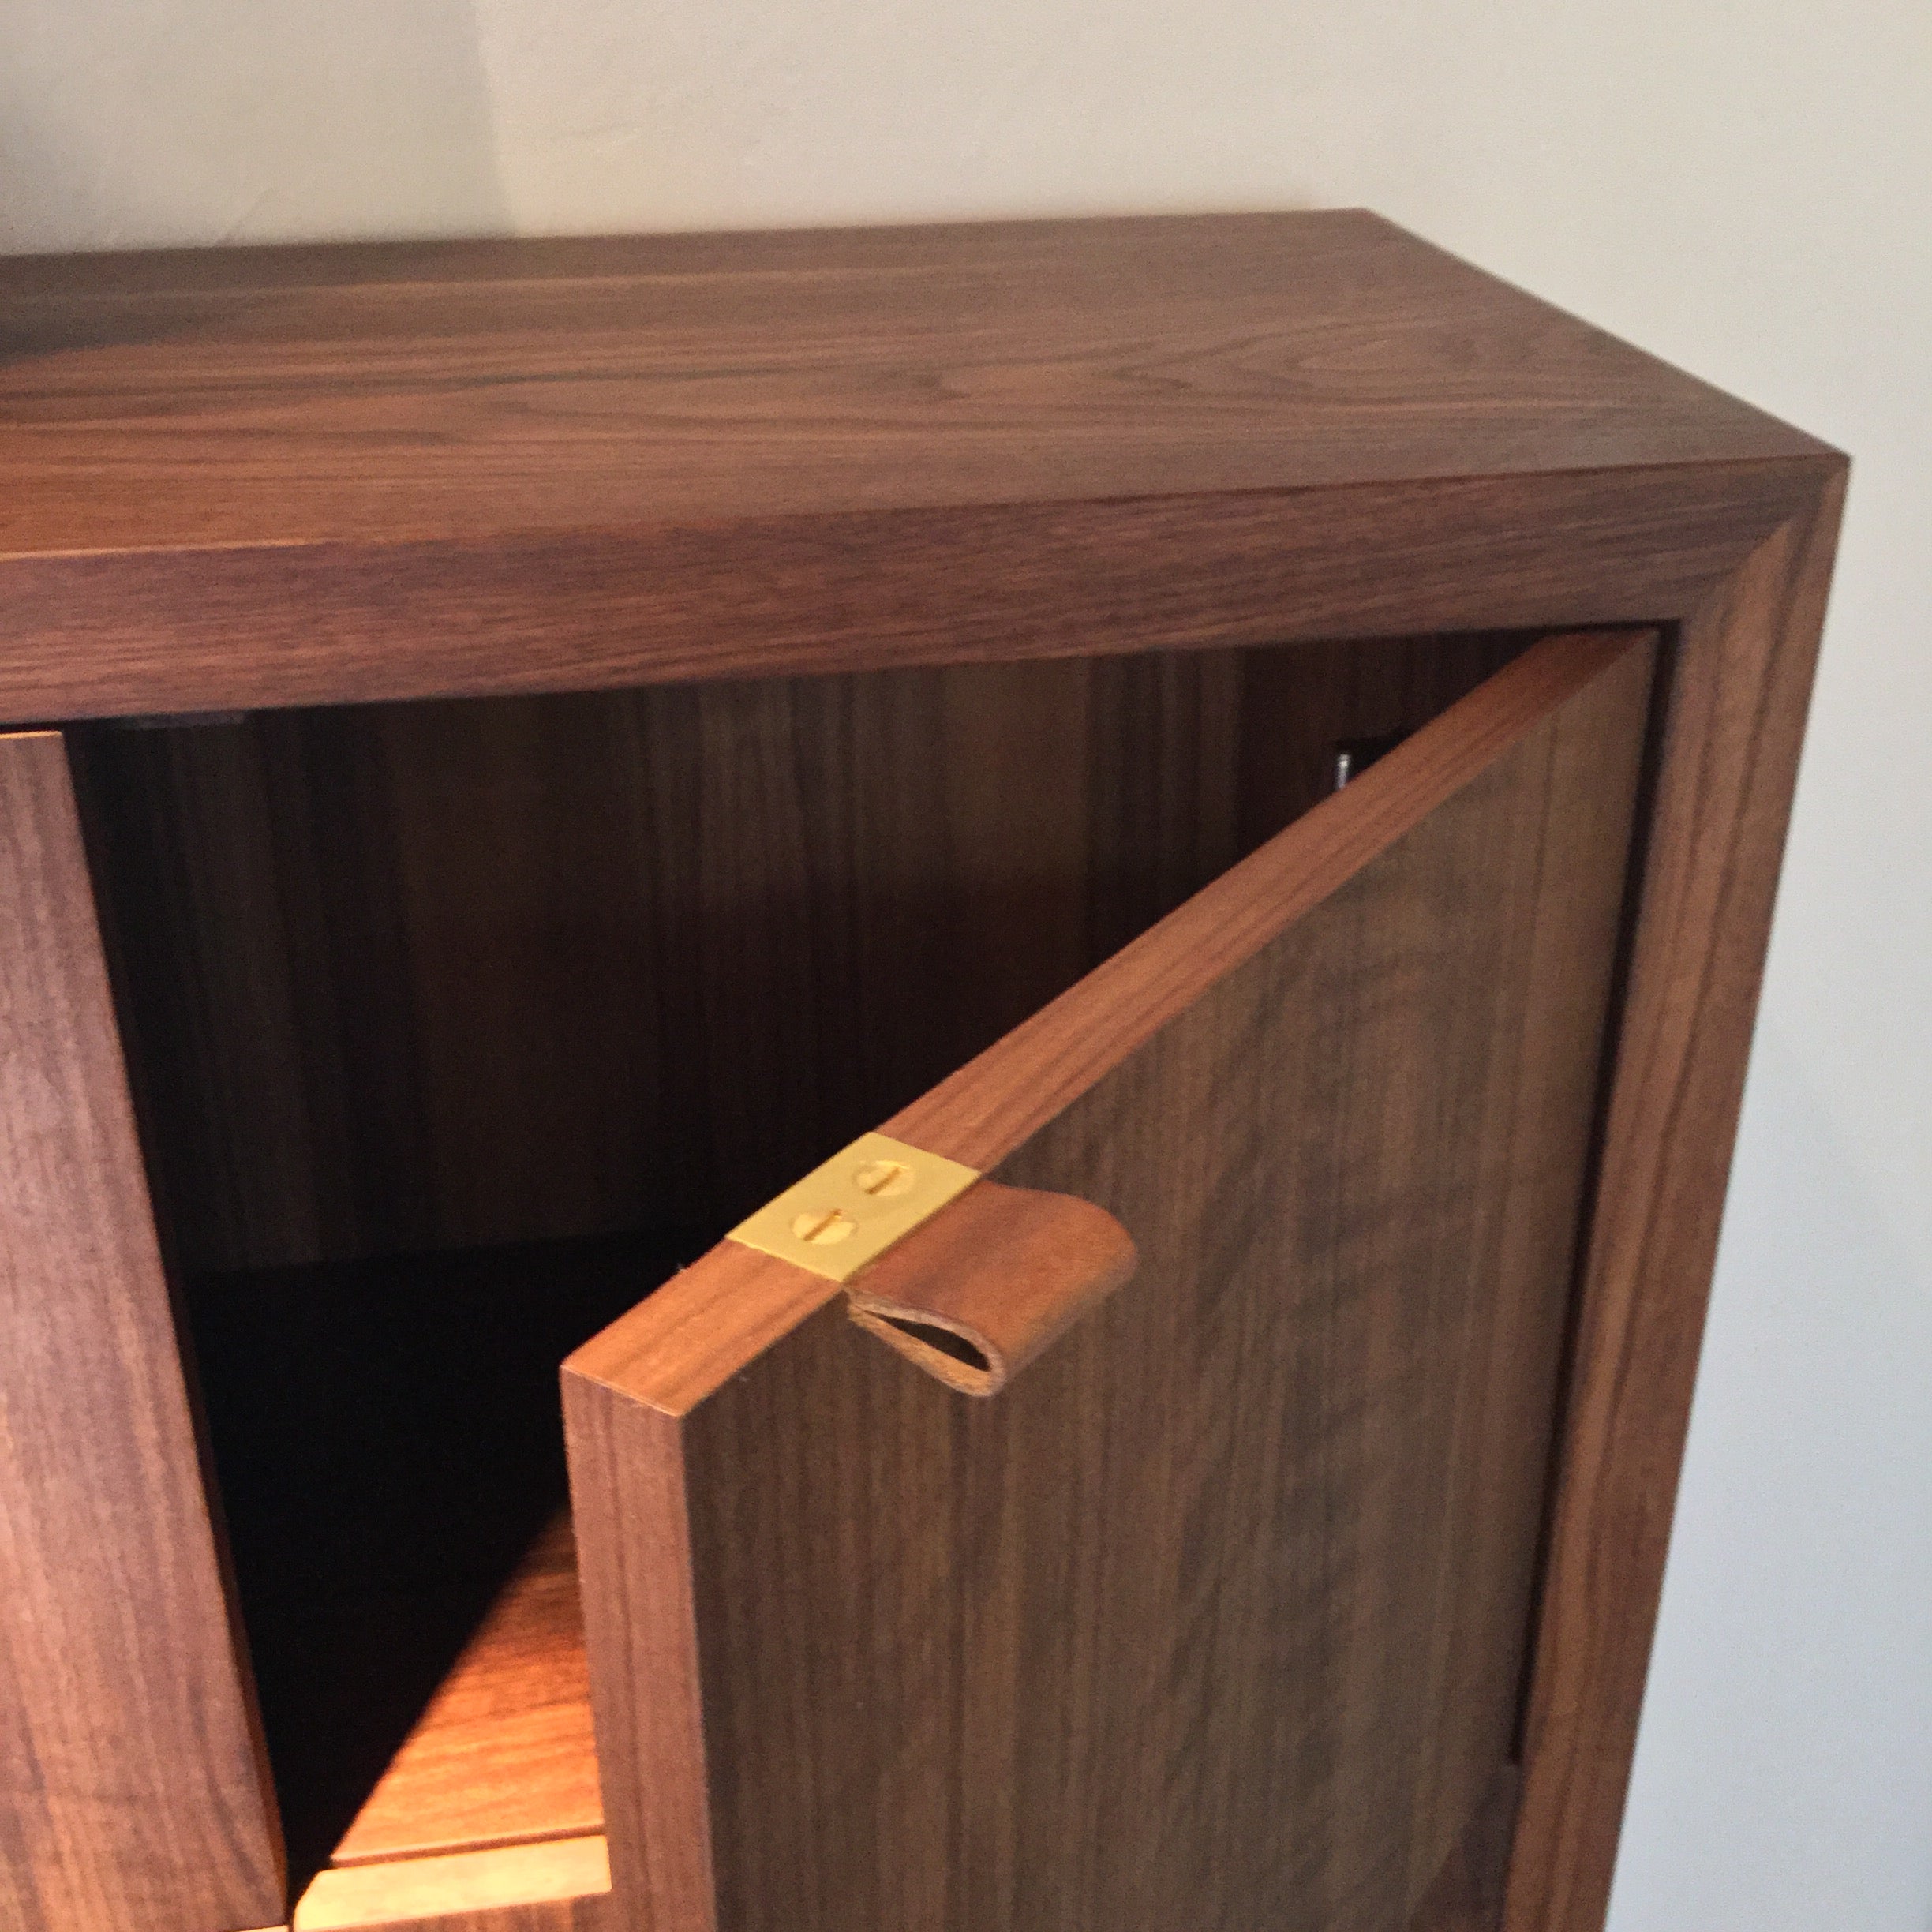 This tallboy dresser with figured claro walnut was originally designed for one of our early studio patrons who owned a historic Santa Fe home. Historic homes in this city are notorious for having no closet space and having small bedrooms. Those two